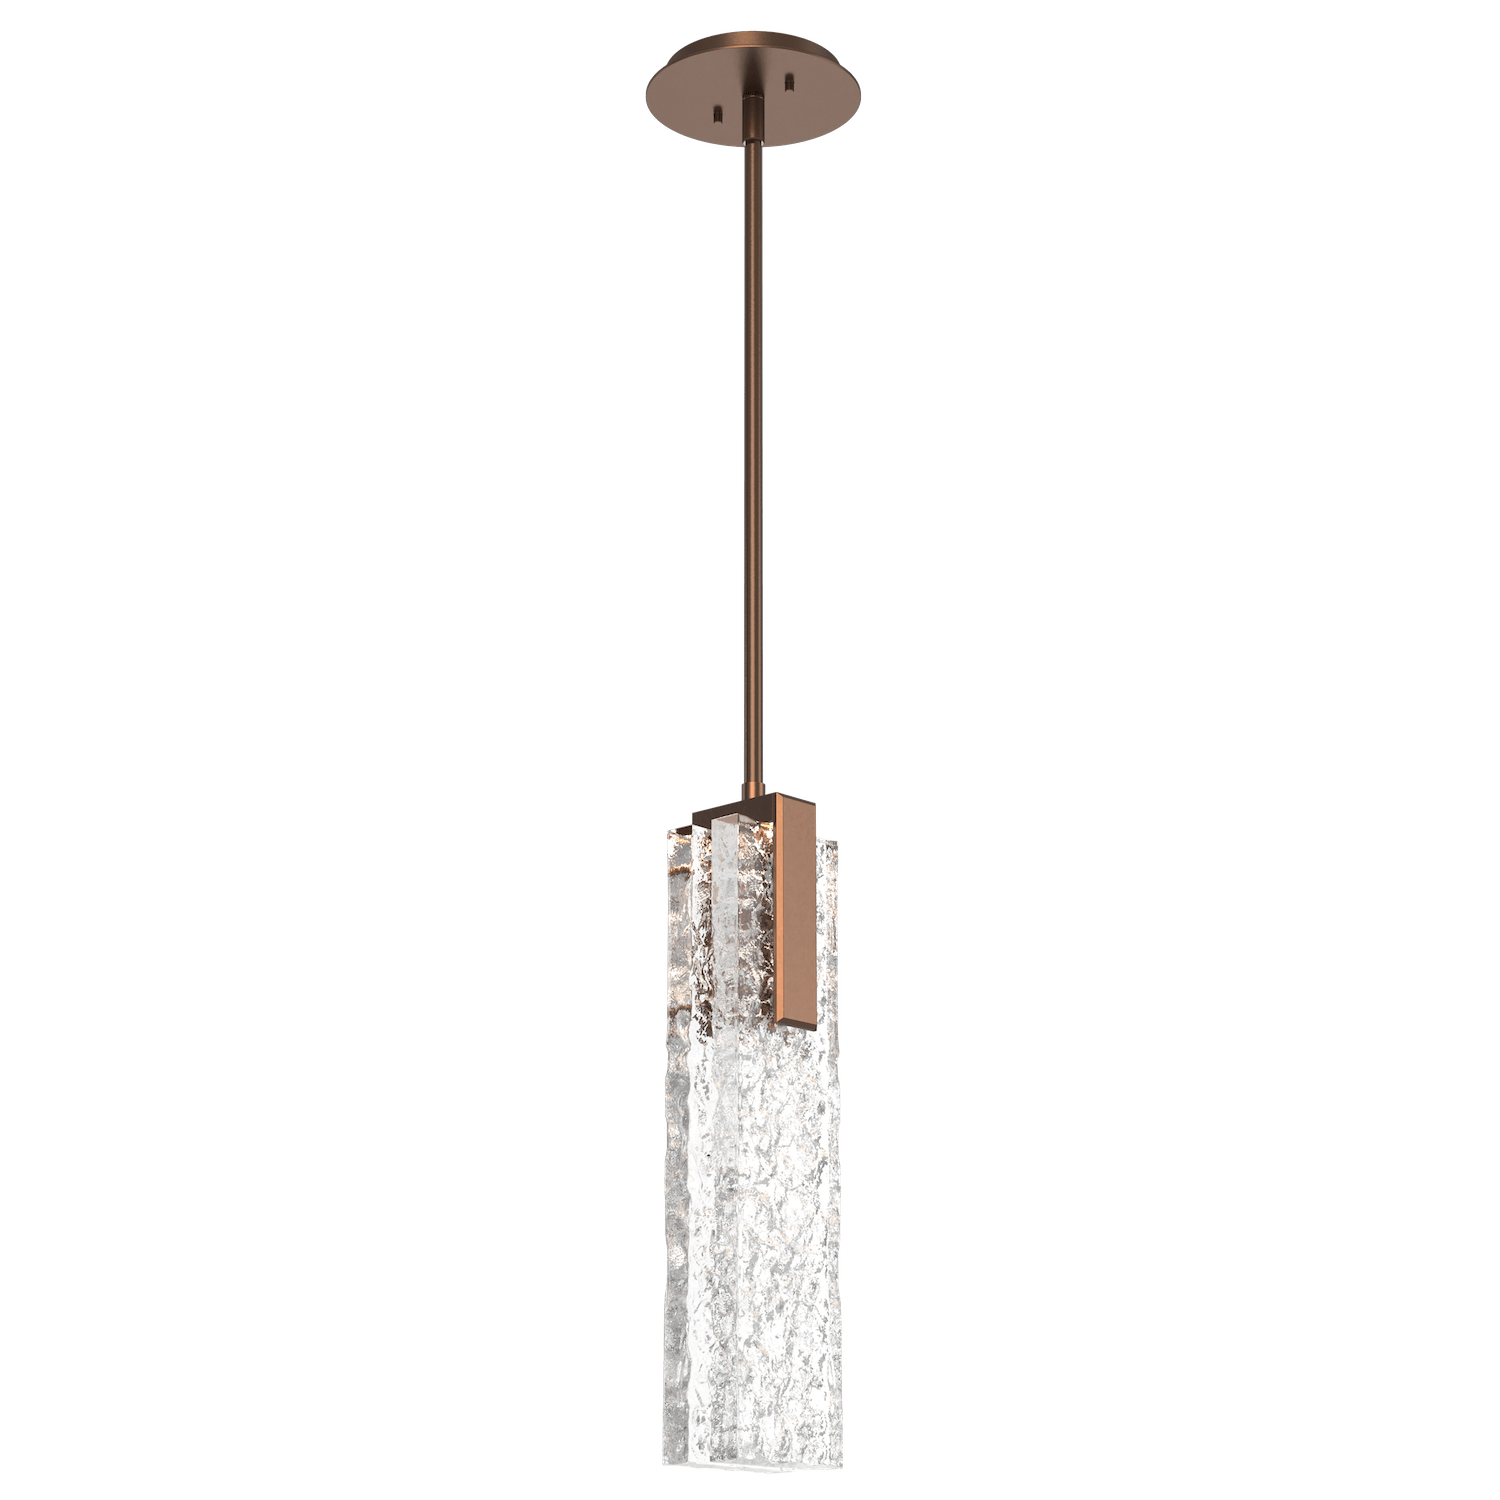 LAB0061-17-BB-GC-Hammerton-Studio-Glacier-pendant-light-with-burnished-bronze-finish-and-clear-blown-glass-with-geo-clear-cast-glass-diffusers-and-LED-lamping